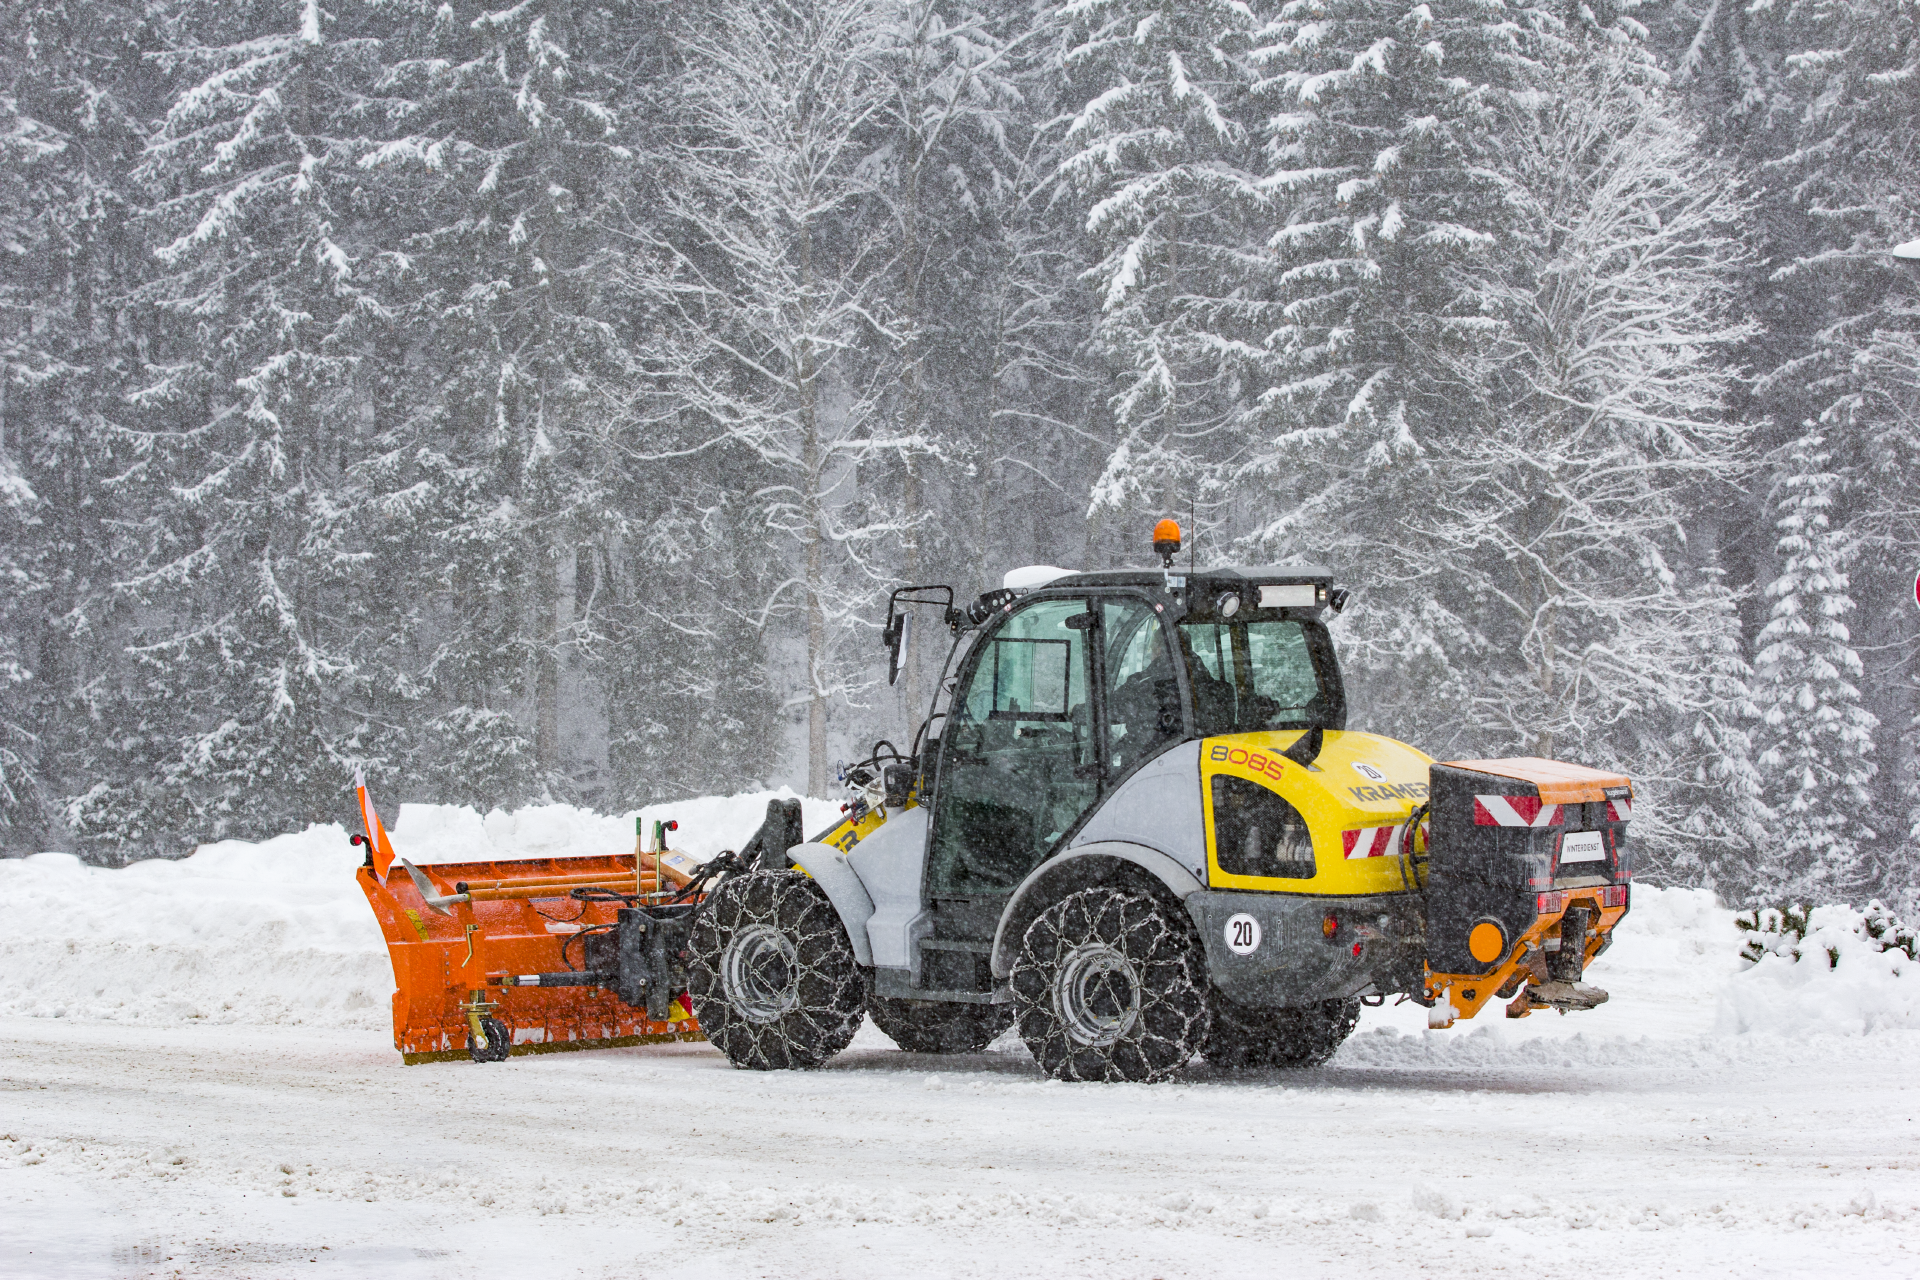 The Kramer wheel loader 8085 while clearing snow.